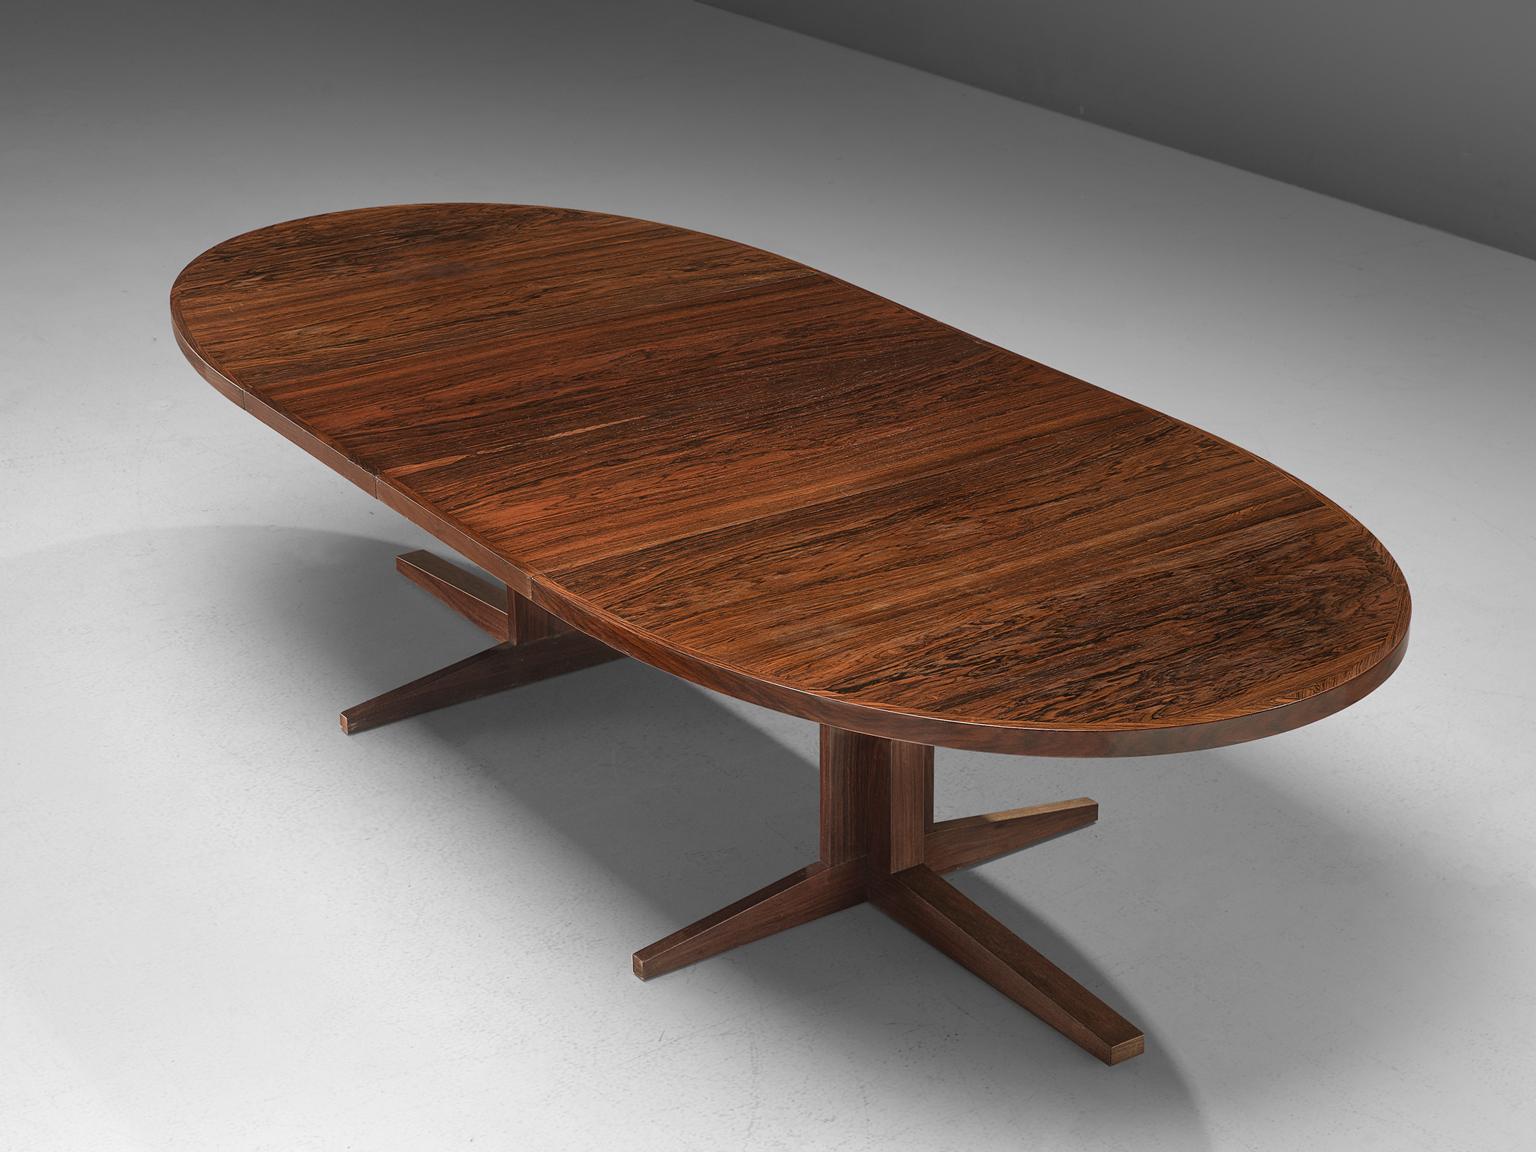 John Mortensen for Heltborg Møbler, dining table model HM55, rosewood, Denmark, 1960s. 

Large oval dining table with 2 leafs. This table has a very interesting base. In small position the legs form a cross with four points. When extended the